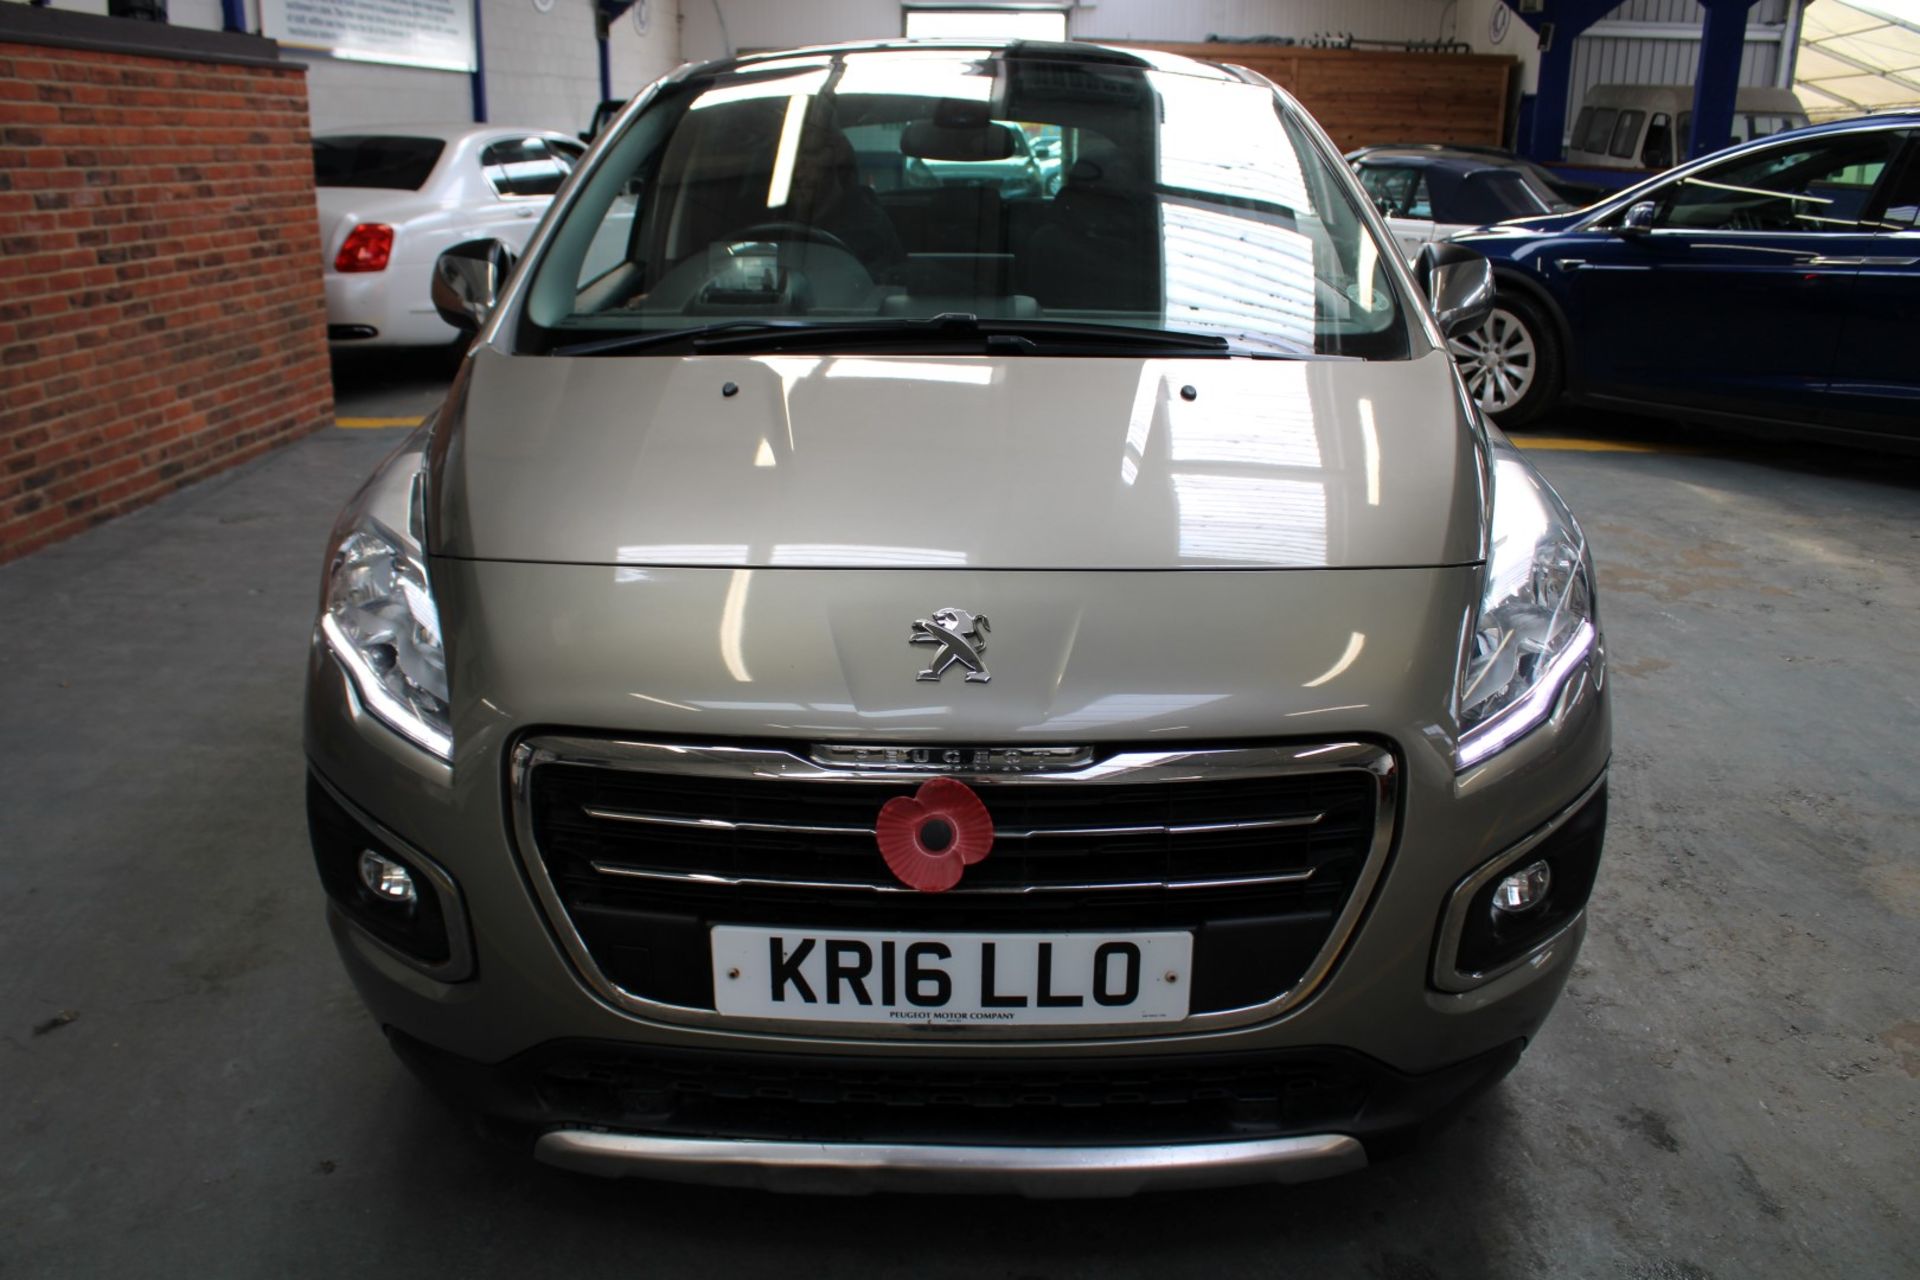 16 16 Peugeot 3008 Allure Blue HDI - Image 2 of 33